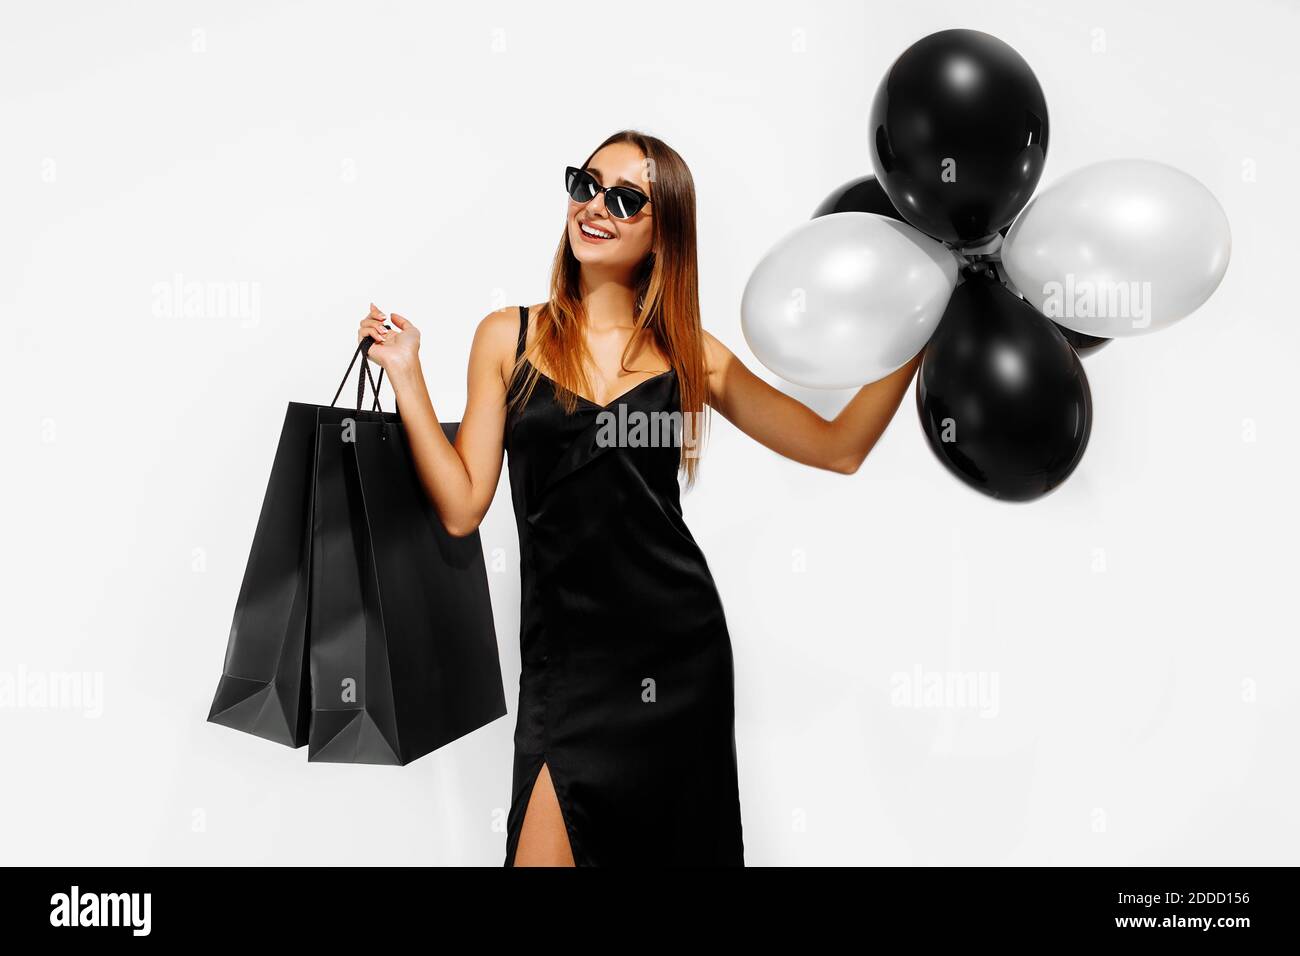 Excited young woman in black dress, with balloons and shopping bags, on white background, Concept of sale, shopping, Black Friday Stock Photo